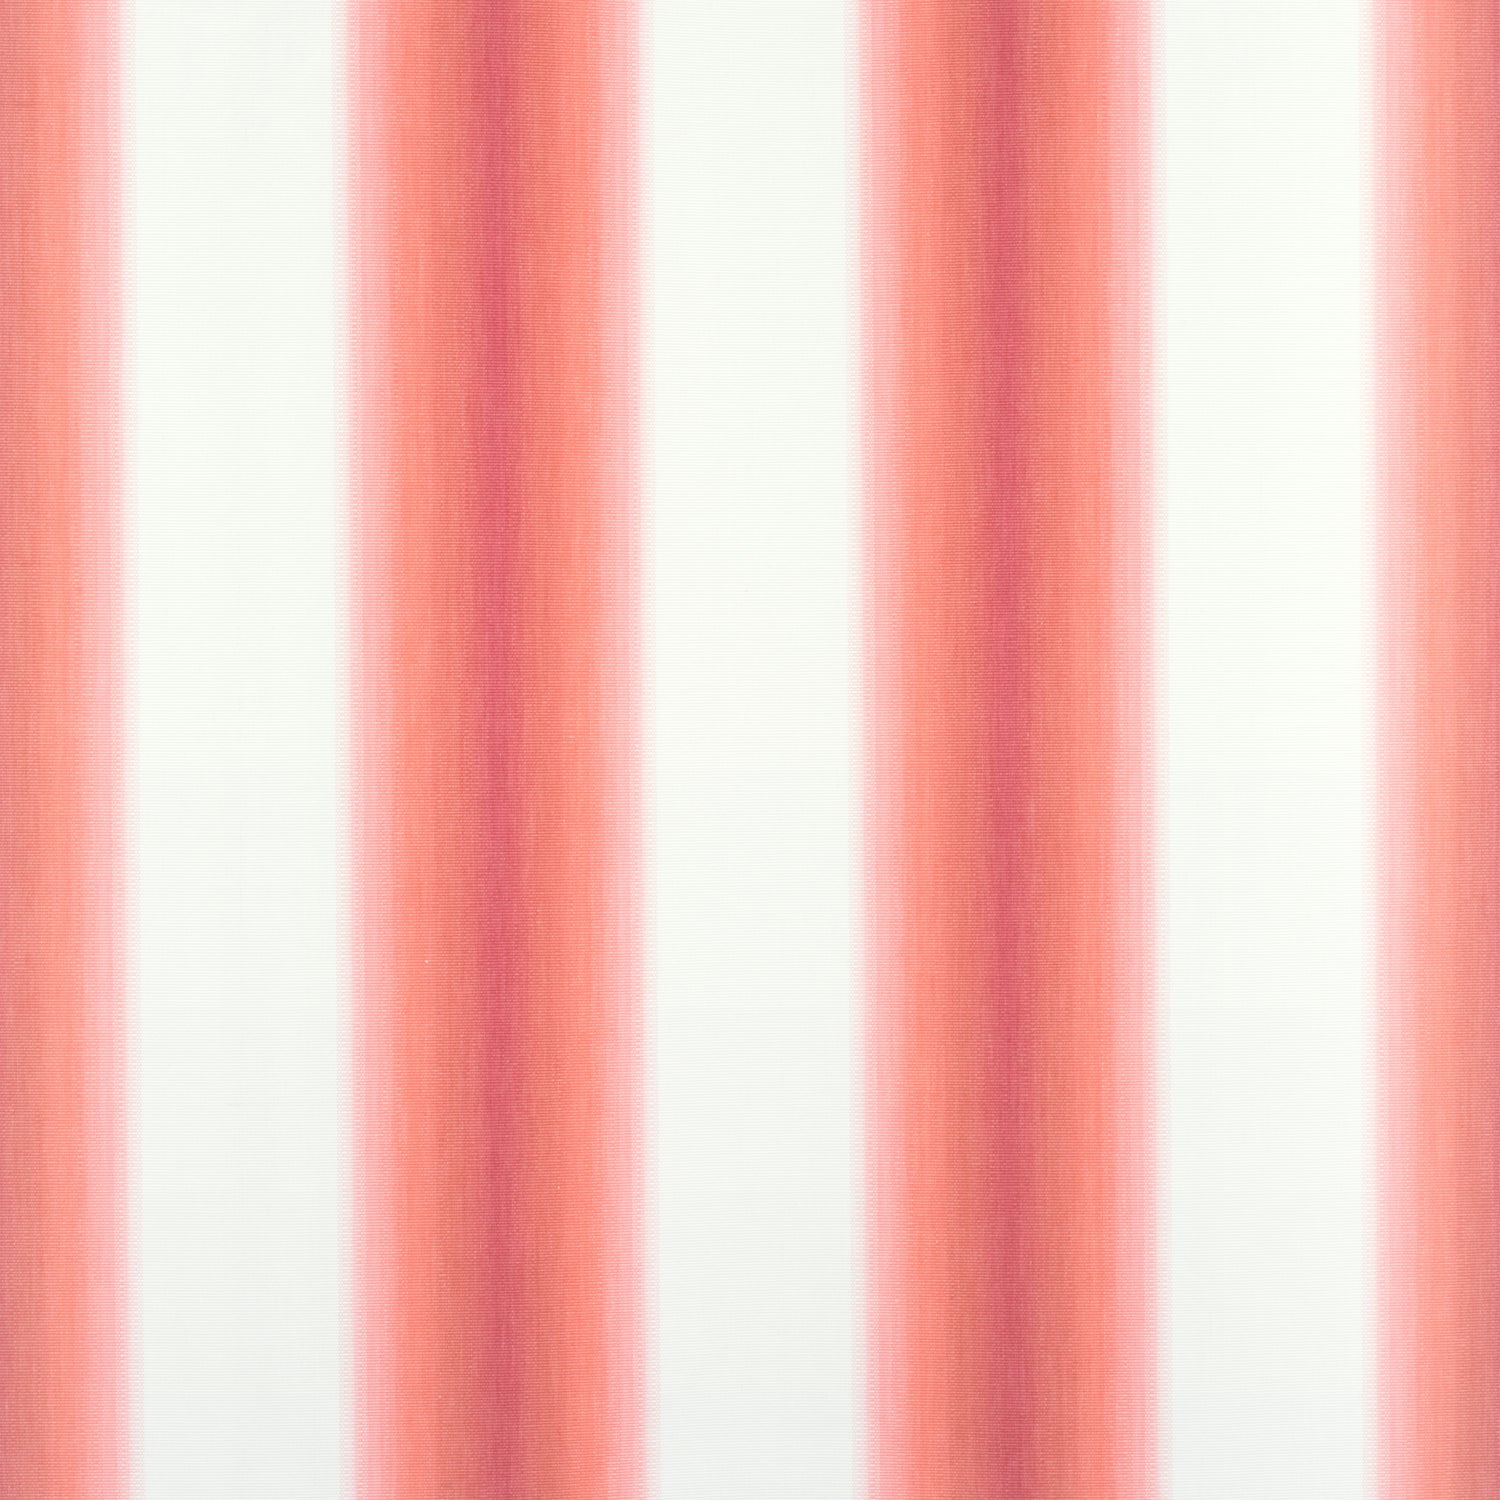 Stockton Stripe fabric in coral color - pattern number W775503 - by Thibaut in the Dynasty collection